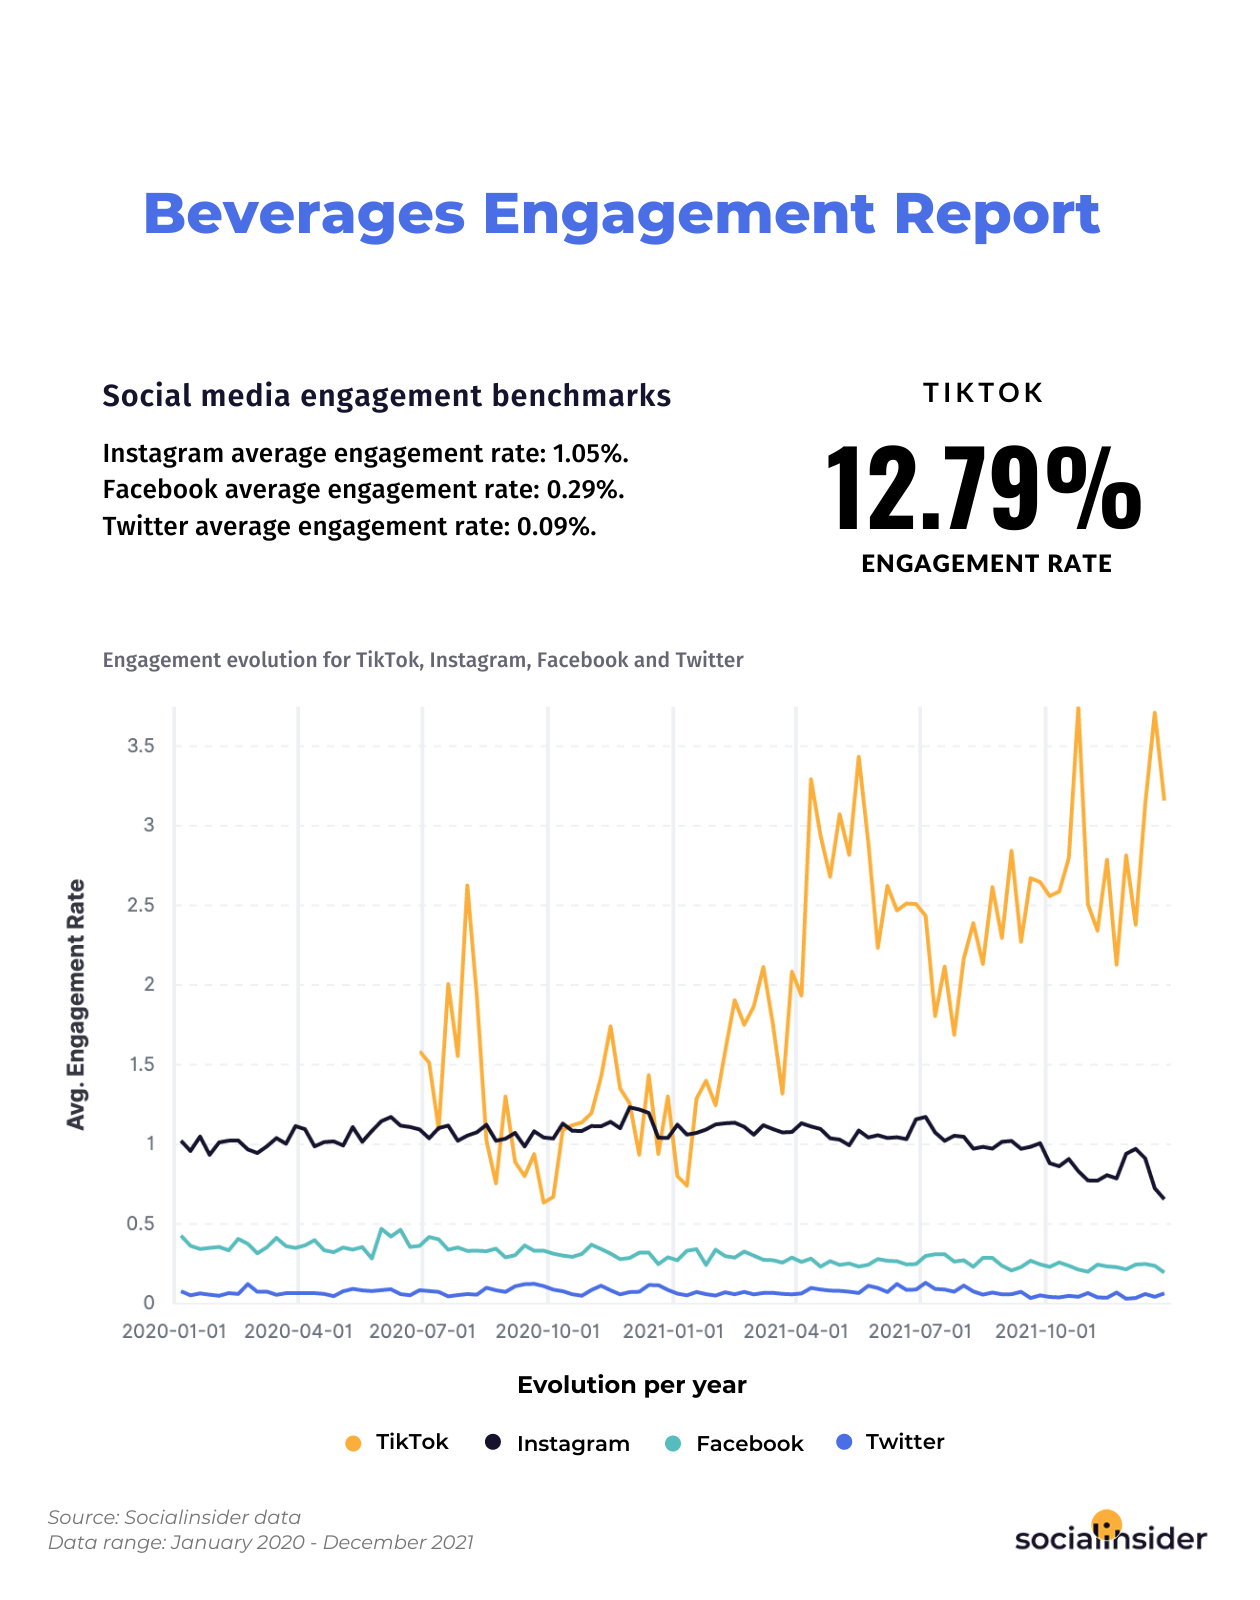 Average engagement rates for the beverages industry in 2022.